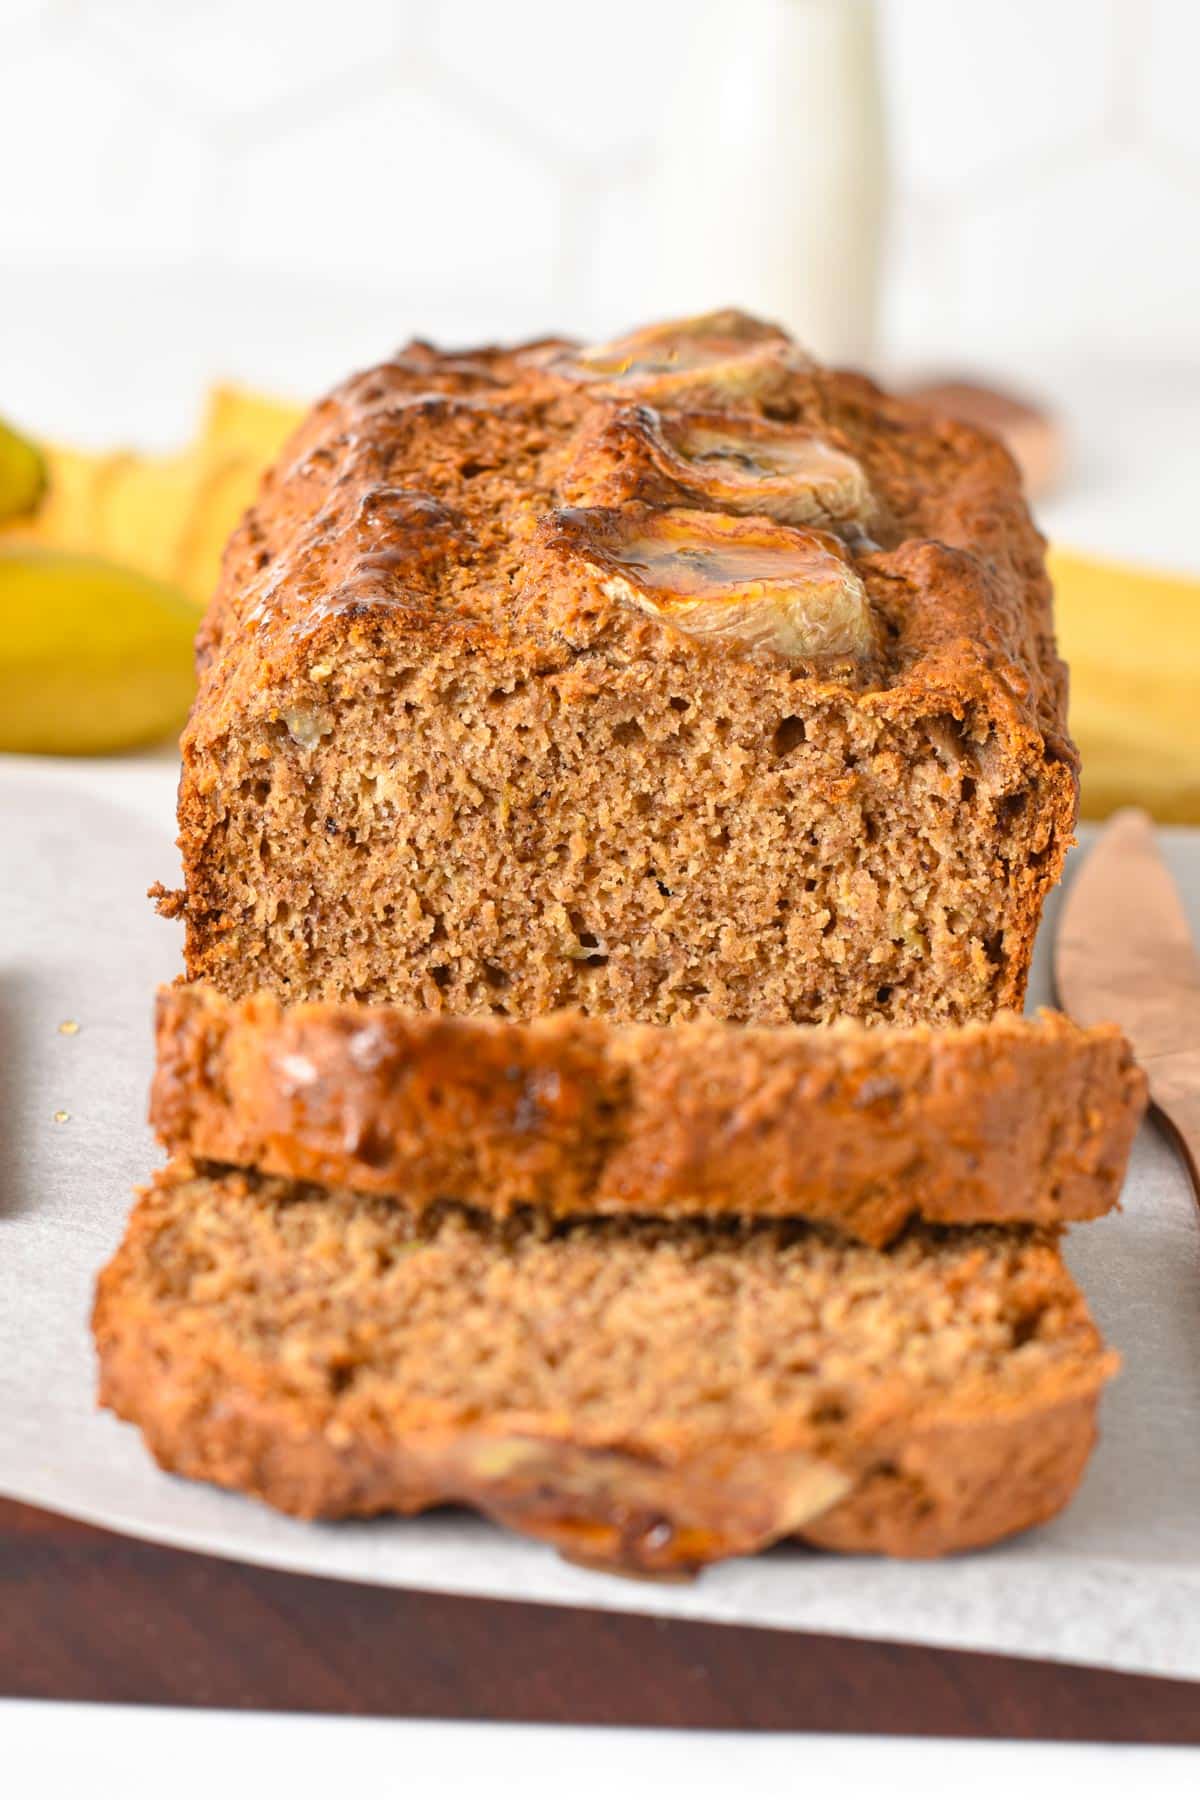 This spelt flour banana bread is the most delicious healthy banana bread you need for breakfast. It's refined sugar-free, egg-free, dairy-free, and packed with vitamins and fiber from spelt flour.